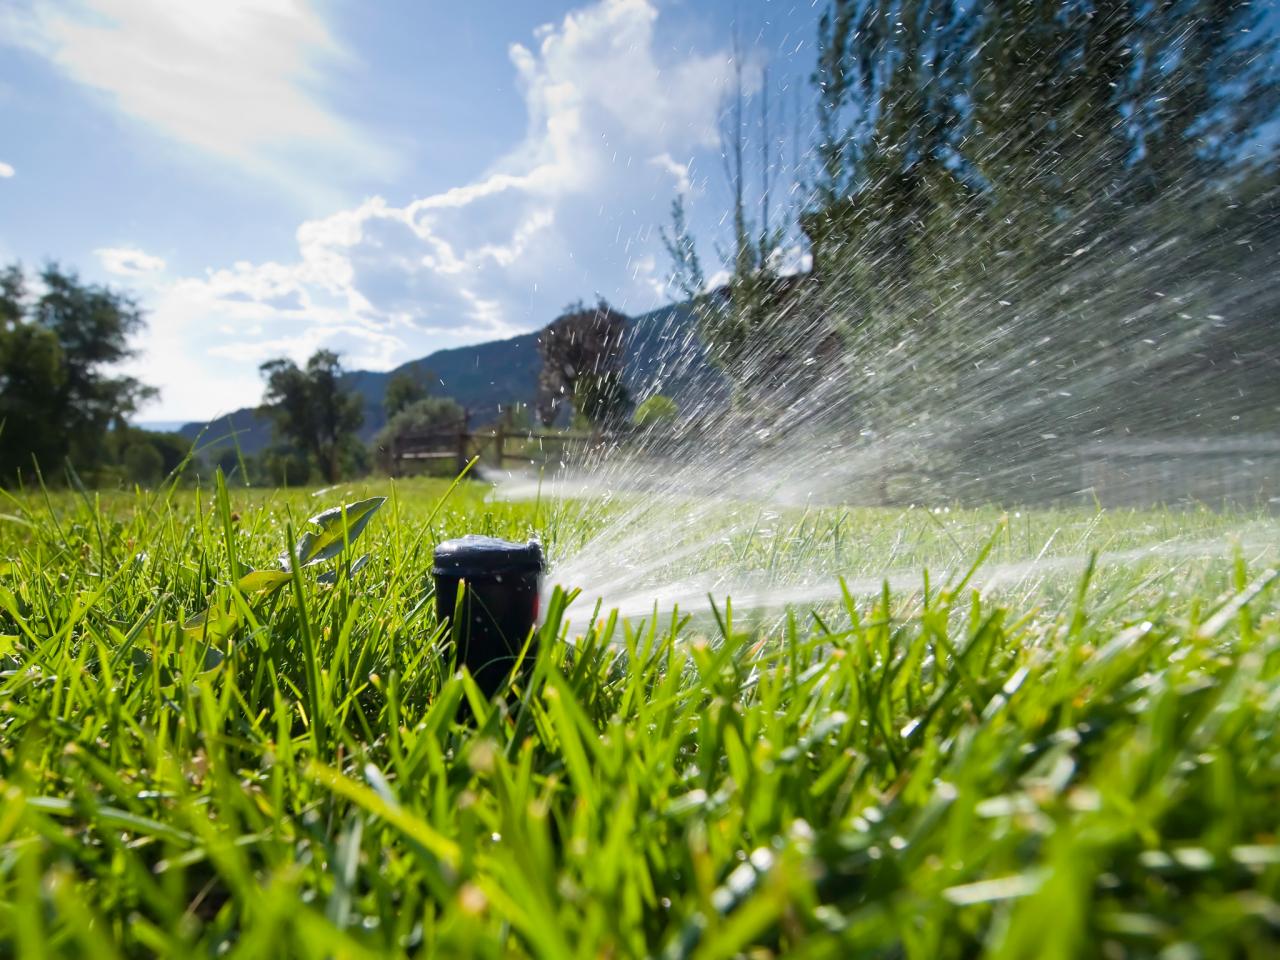 How To Install An Irrigation System In Your Yard